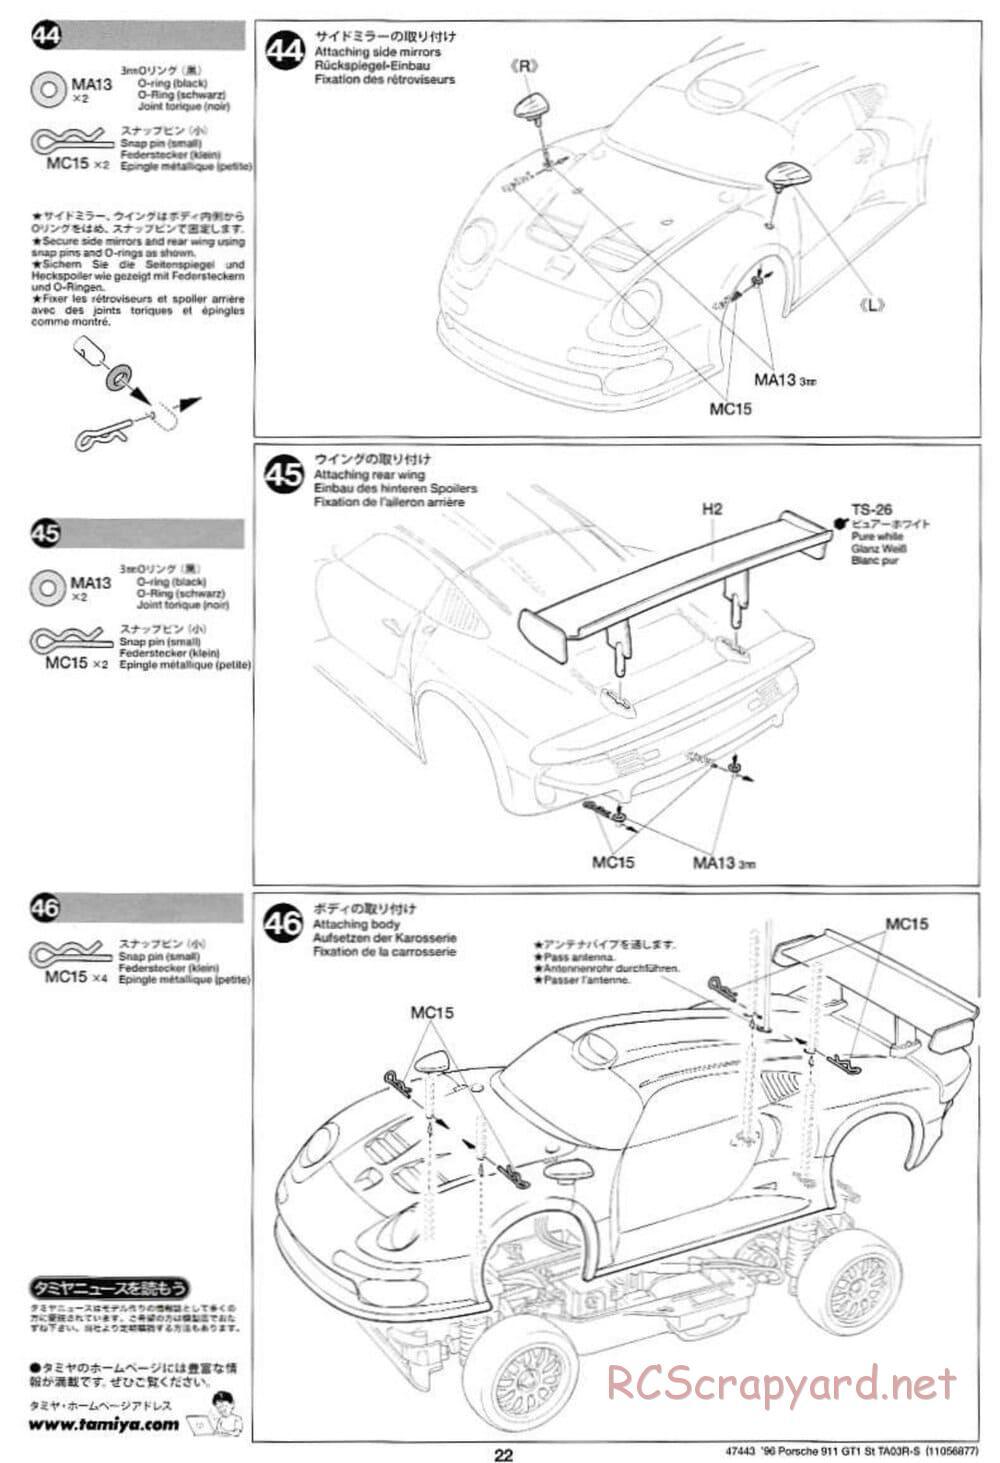 Tamiya - Porsche 911 GT1 Street - TA-03RS Chassis - Manual - Page 22